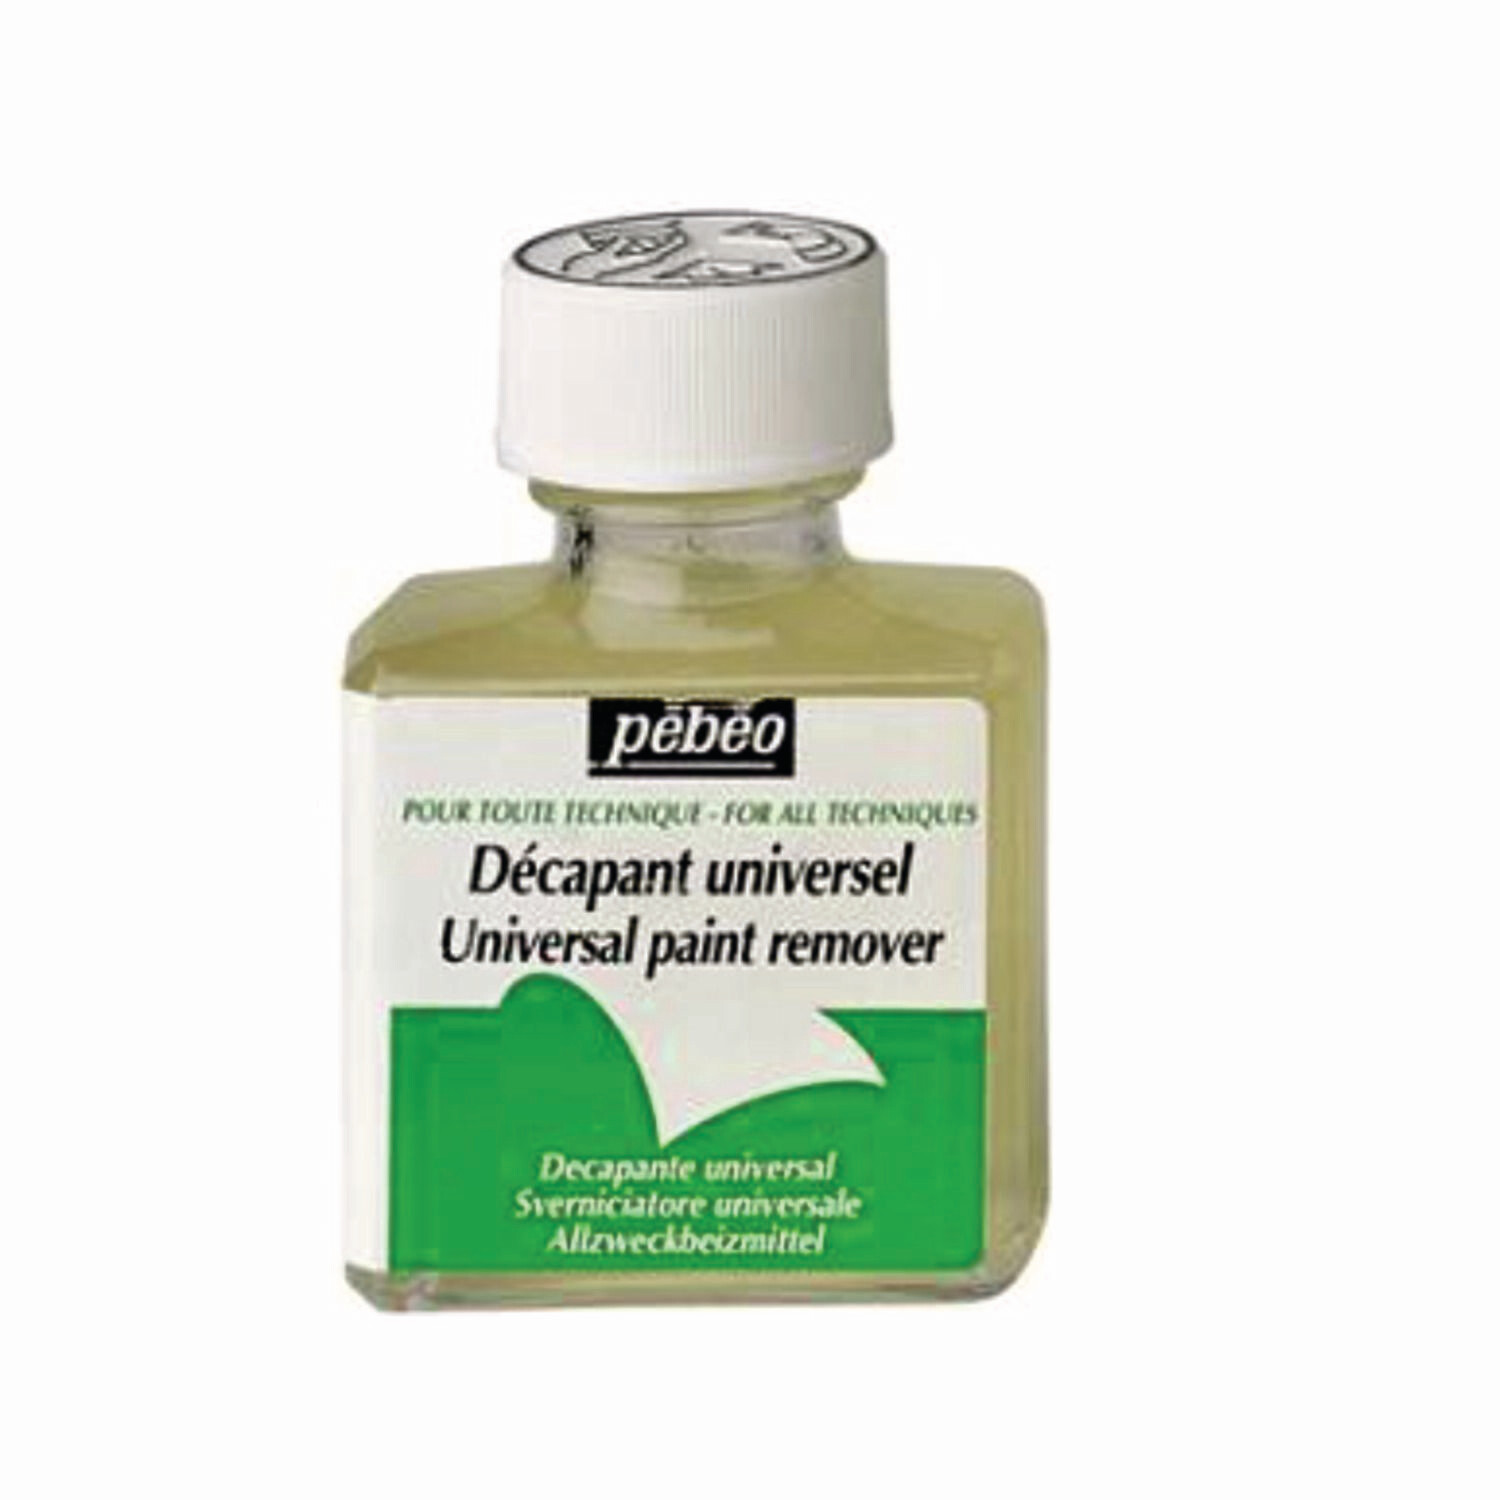 UNIVERSAL PAINT REMOVER. 75 ml